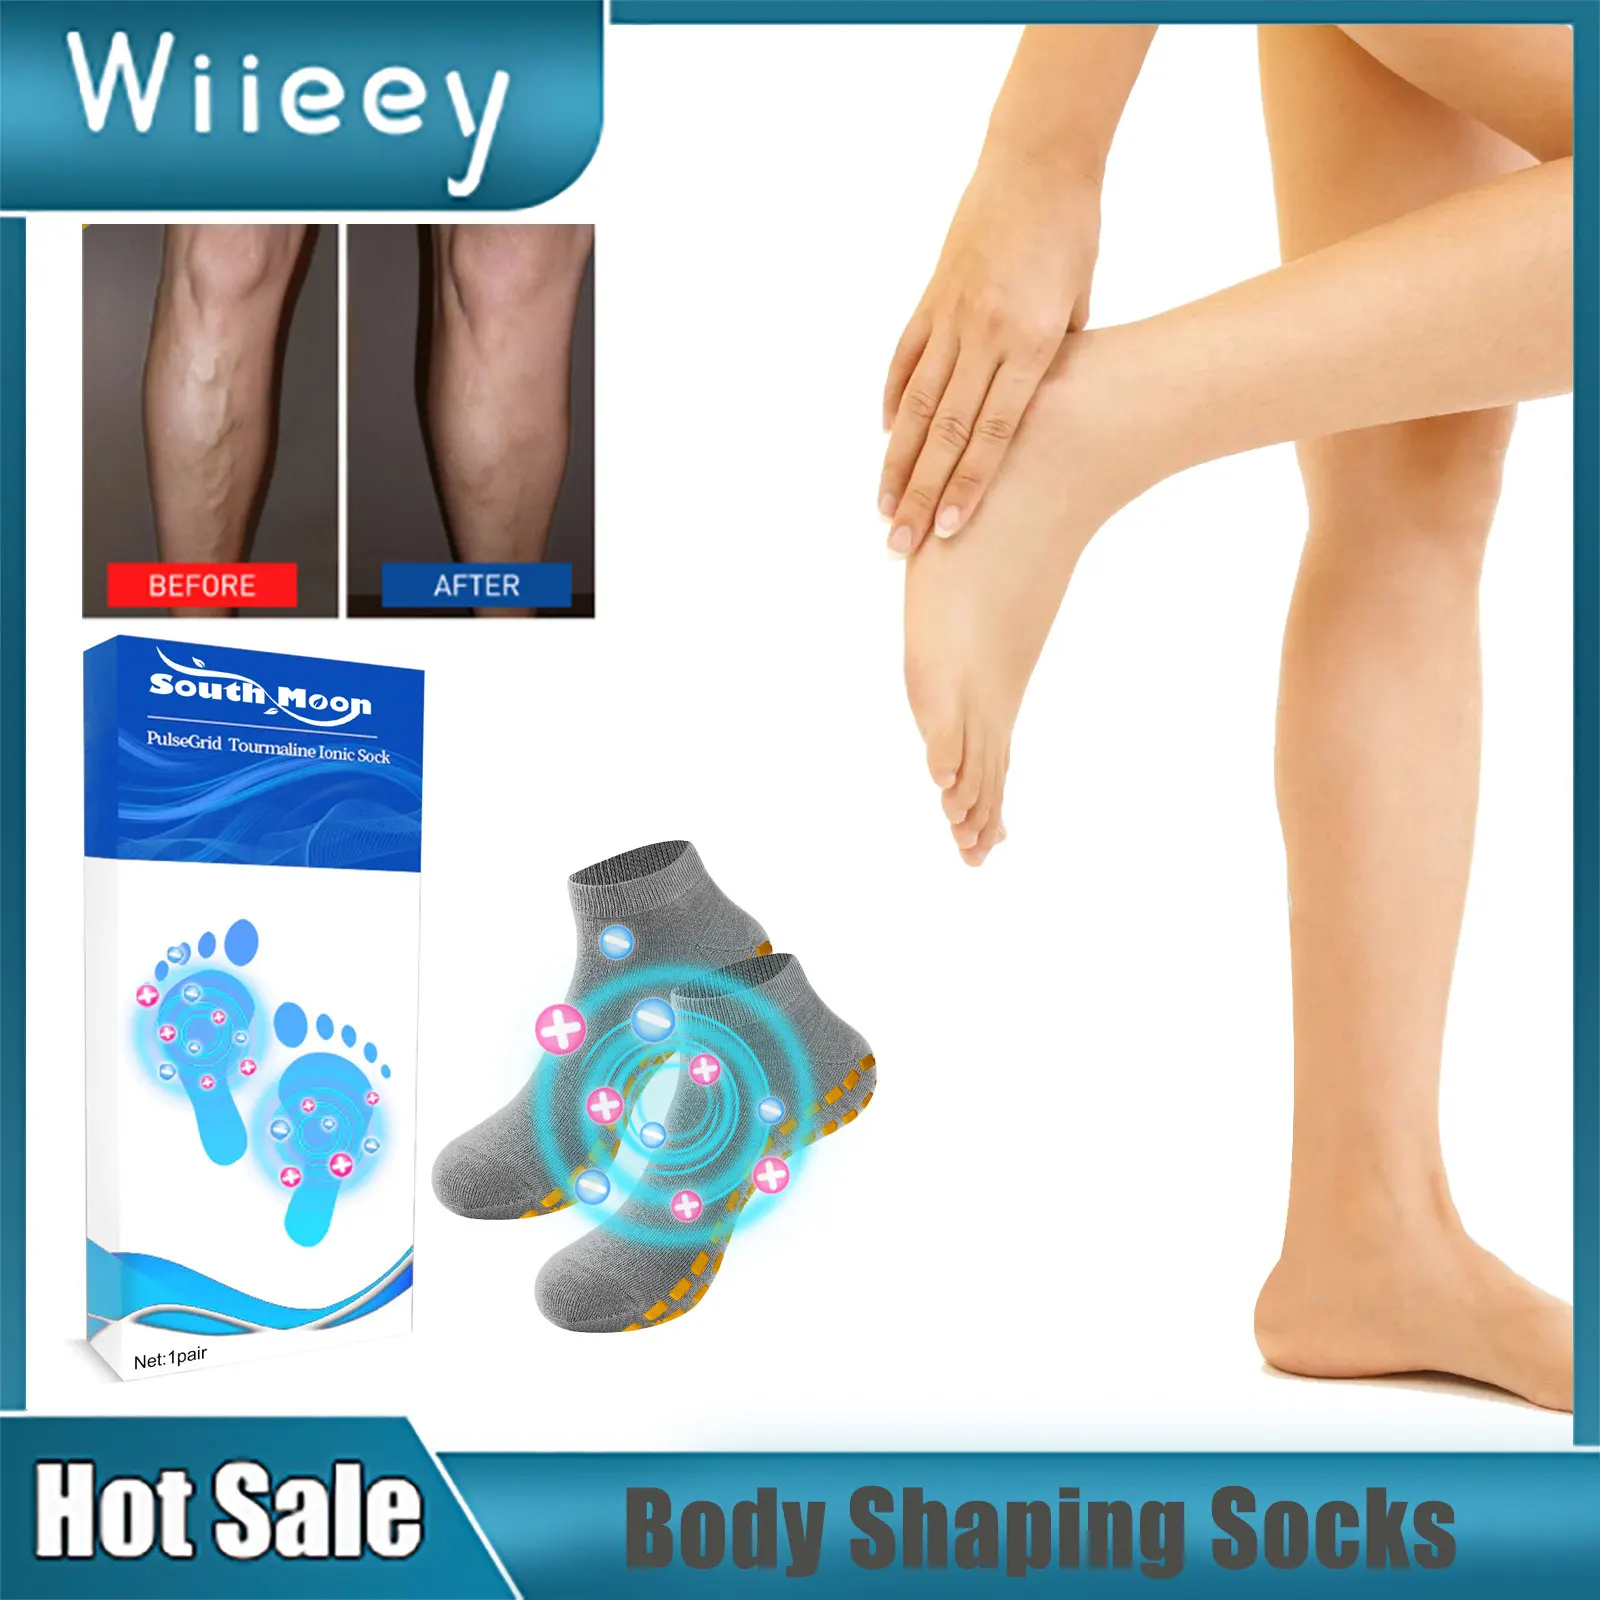 

Remove Cellulite Sock Slimming Promoting Blood Circulation Varicose Veins Treatment Relieve Pain Weight Loss Body Shaping Socks